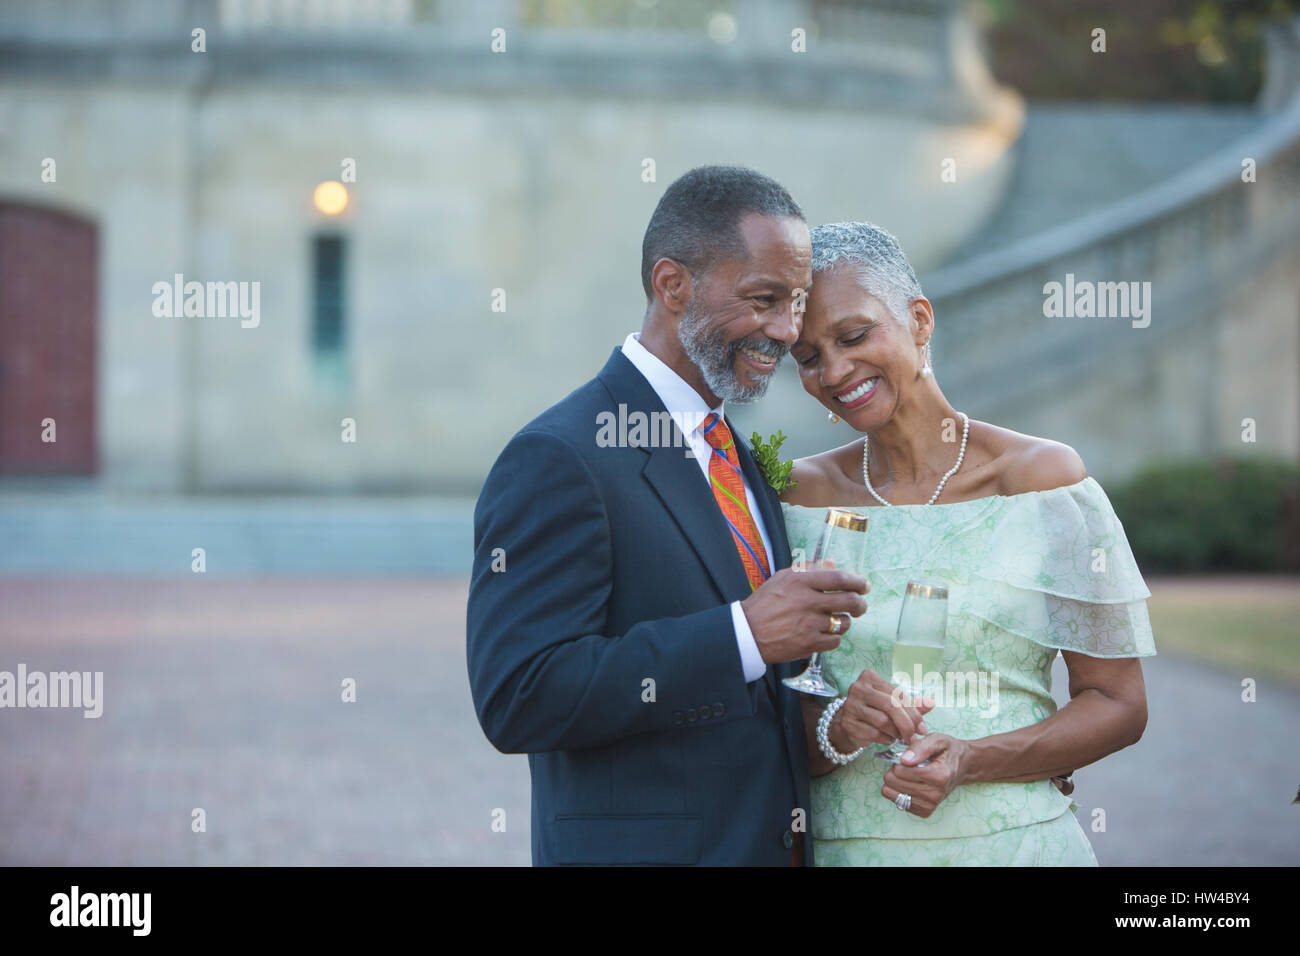 Black couple drinking champagne Banque D'Images